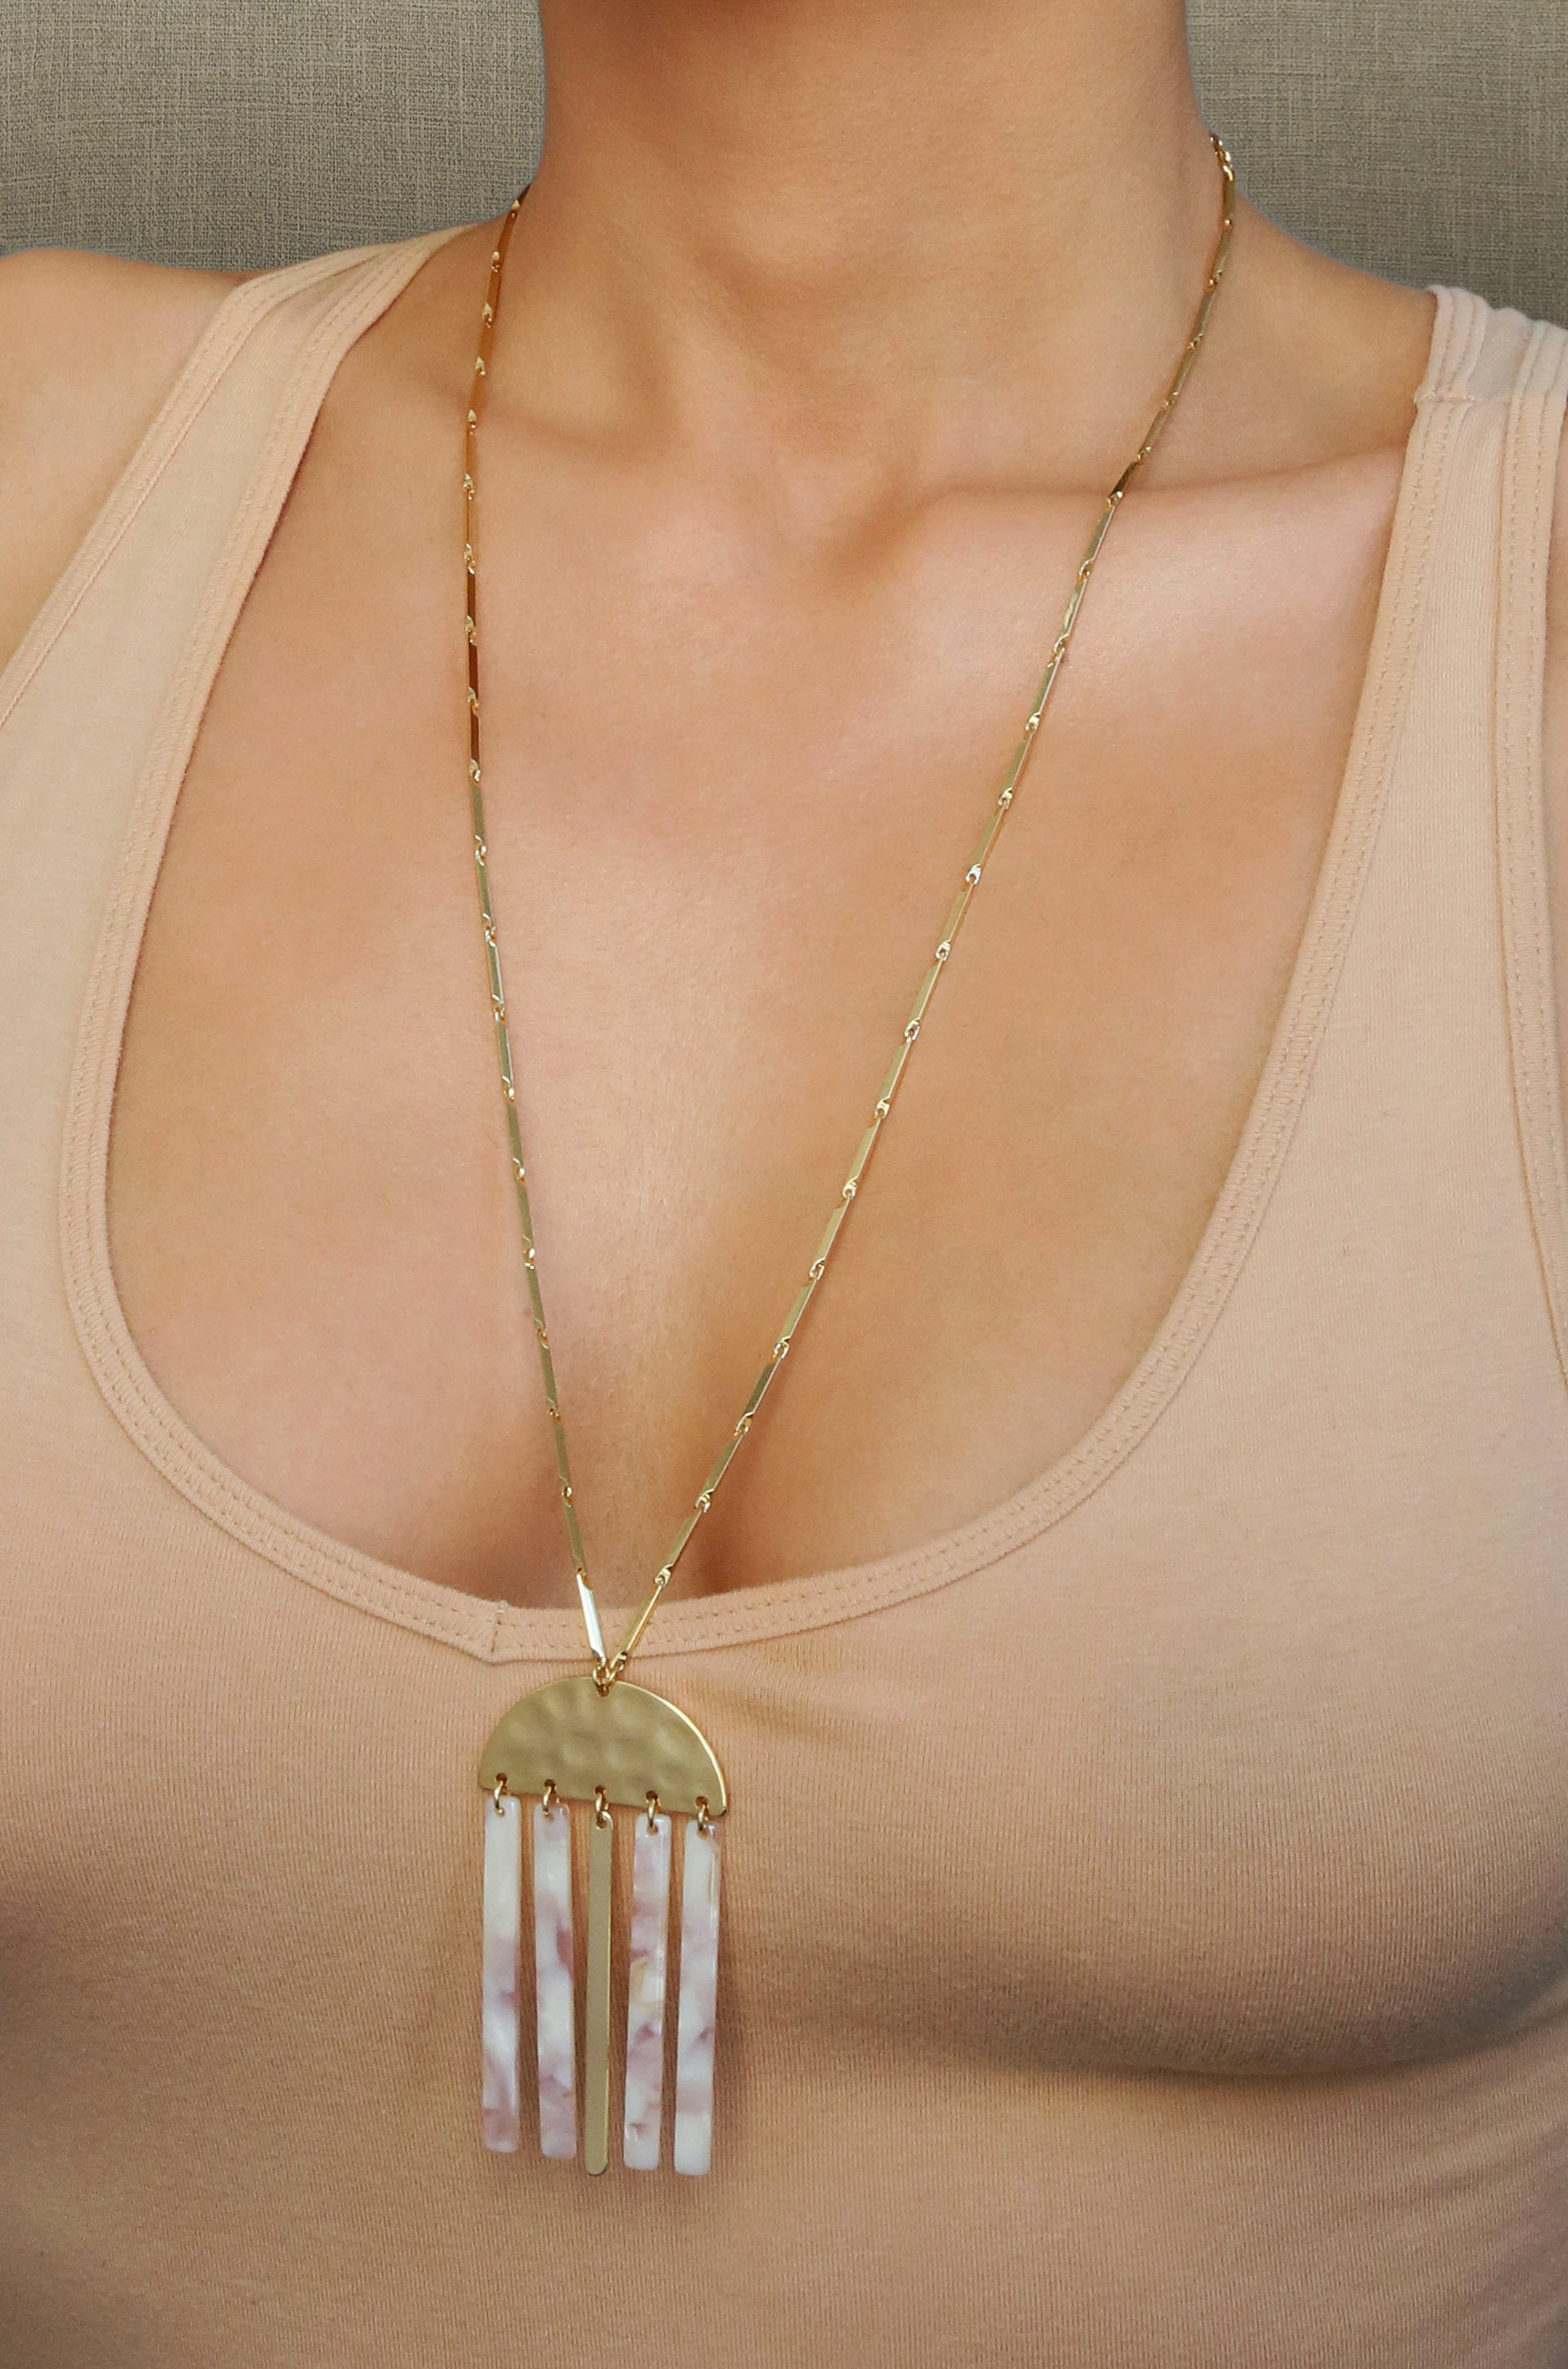 Golden Goddess Geometric Pendant 18k Gold Plated Necklace with Taupe Resin Bars shown on a model  